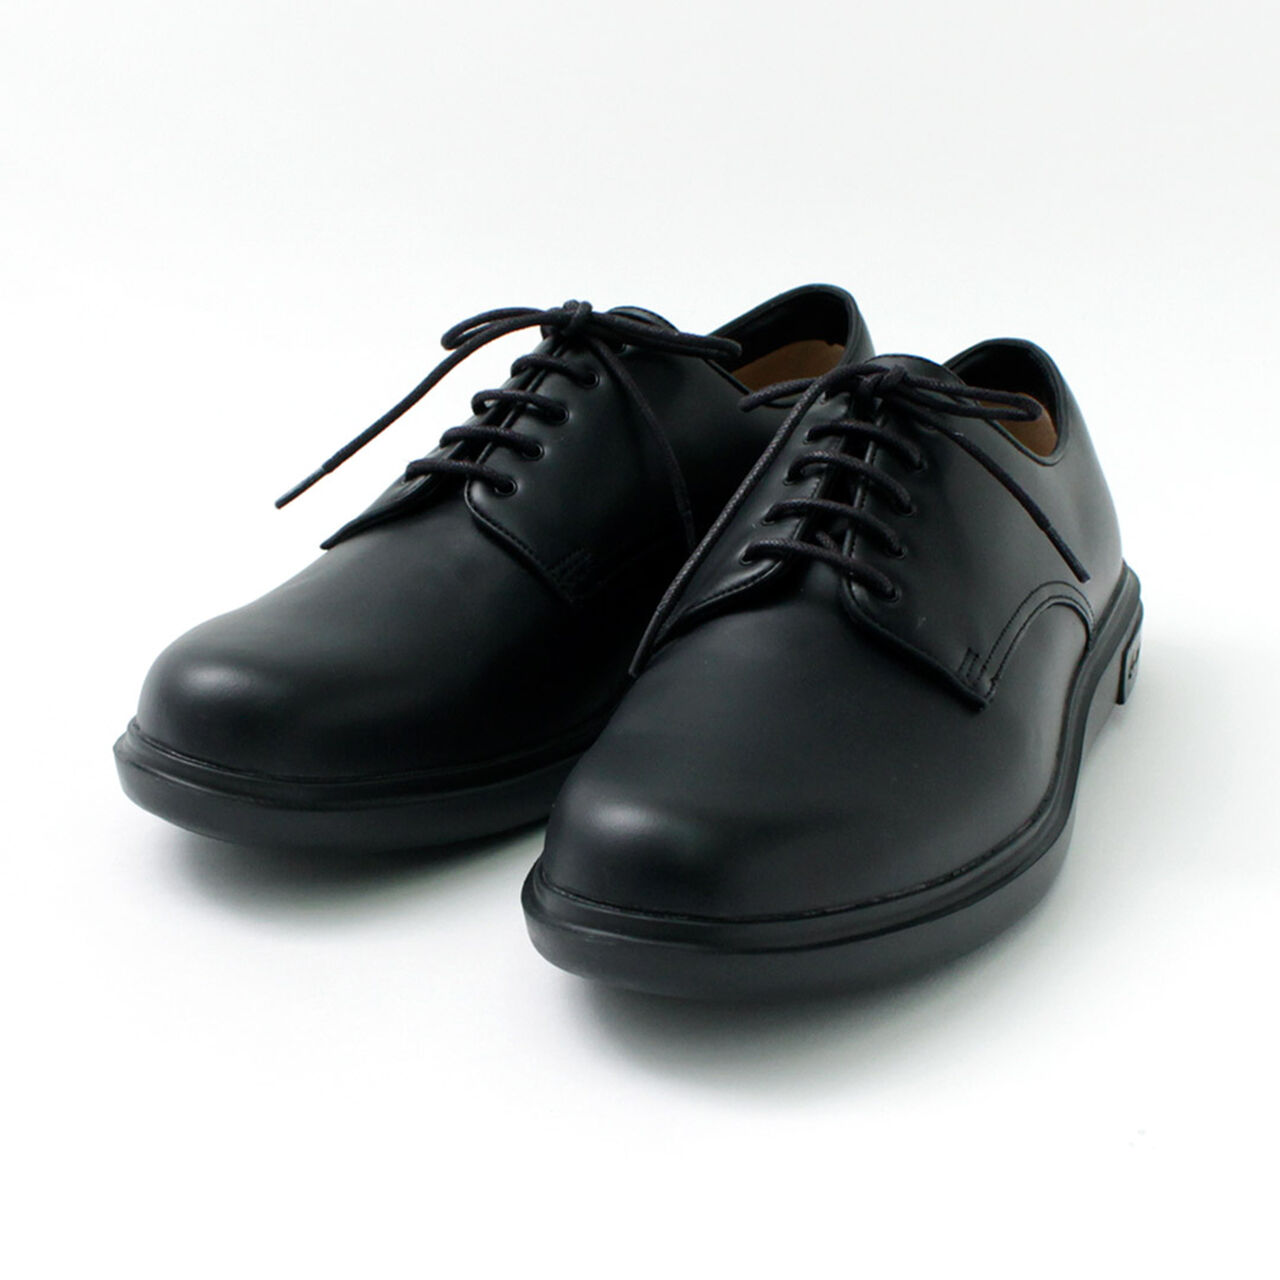 Breathable Waterproof Leather Derby Shoes,Black, large image number 0